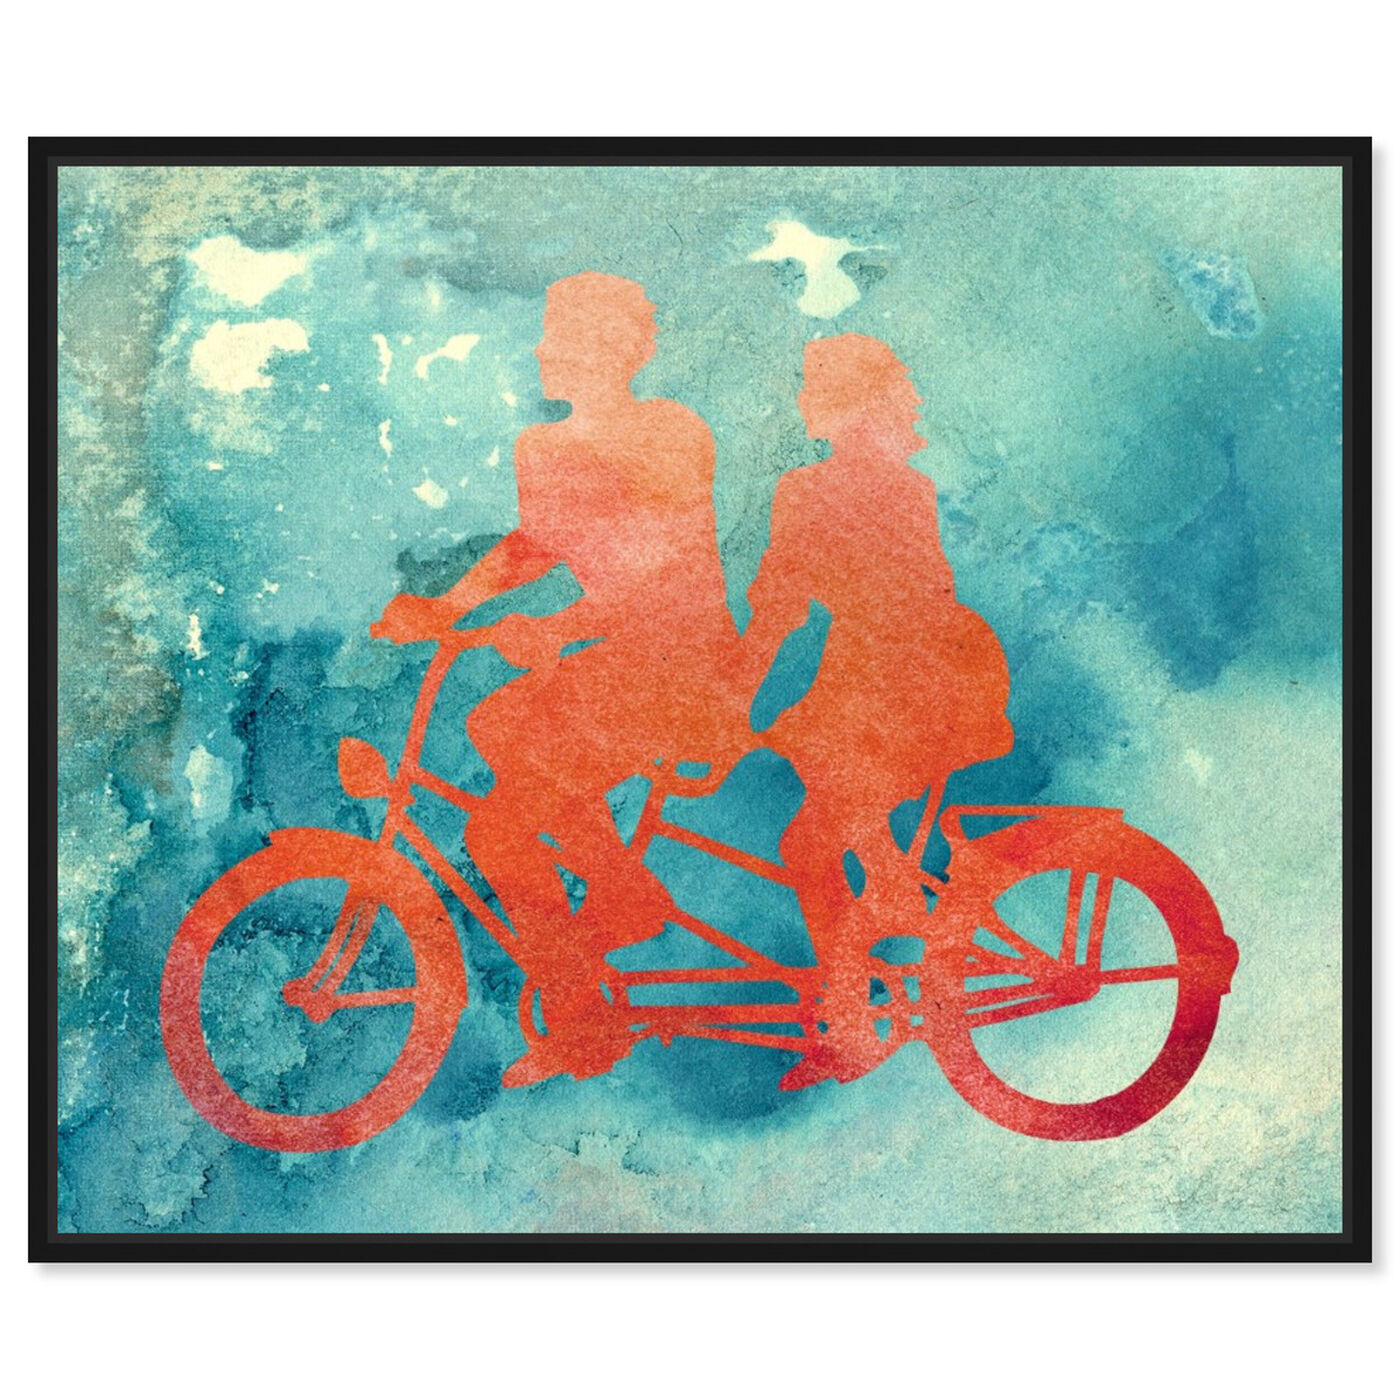 Front view of La Bicyclette featuring transportation and bicycles art.